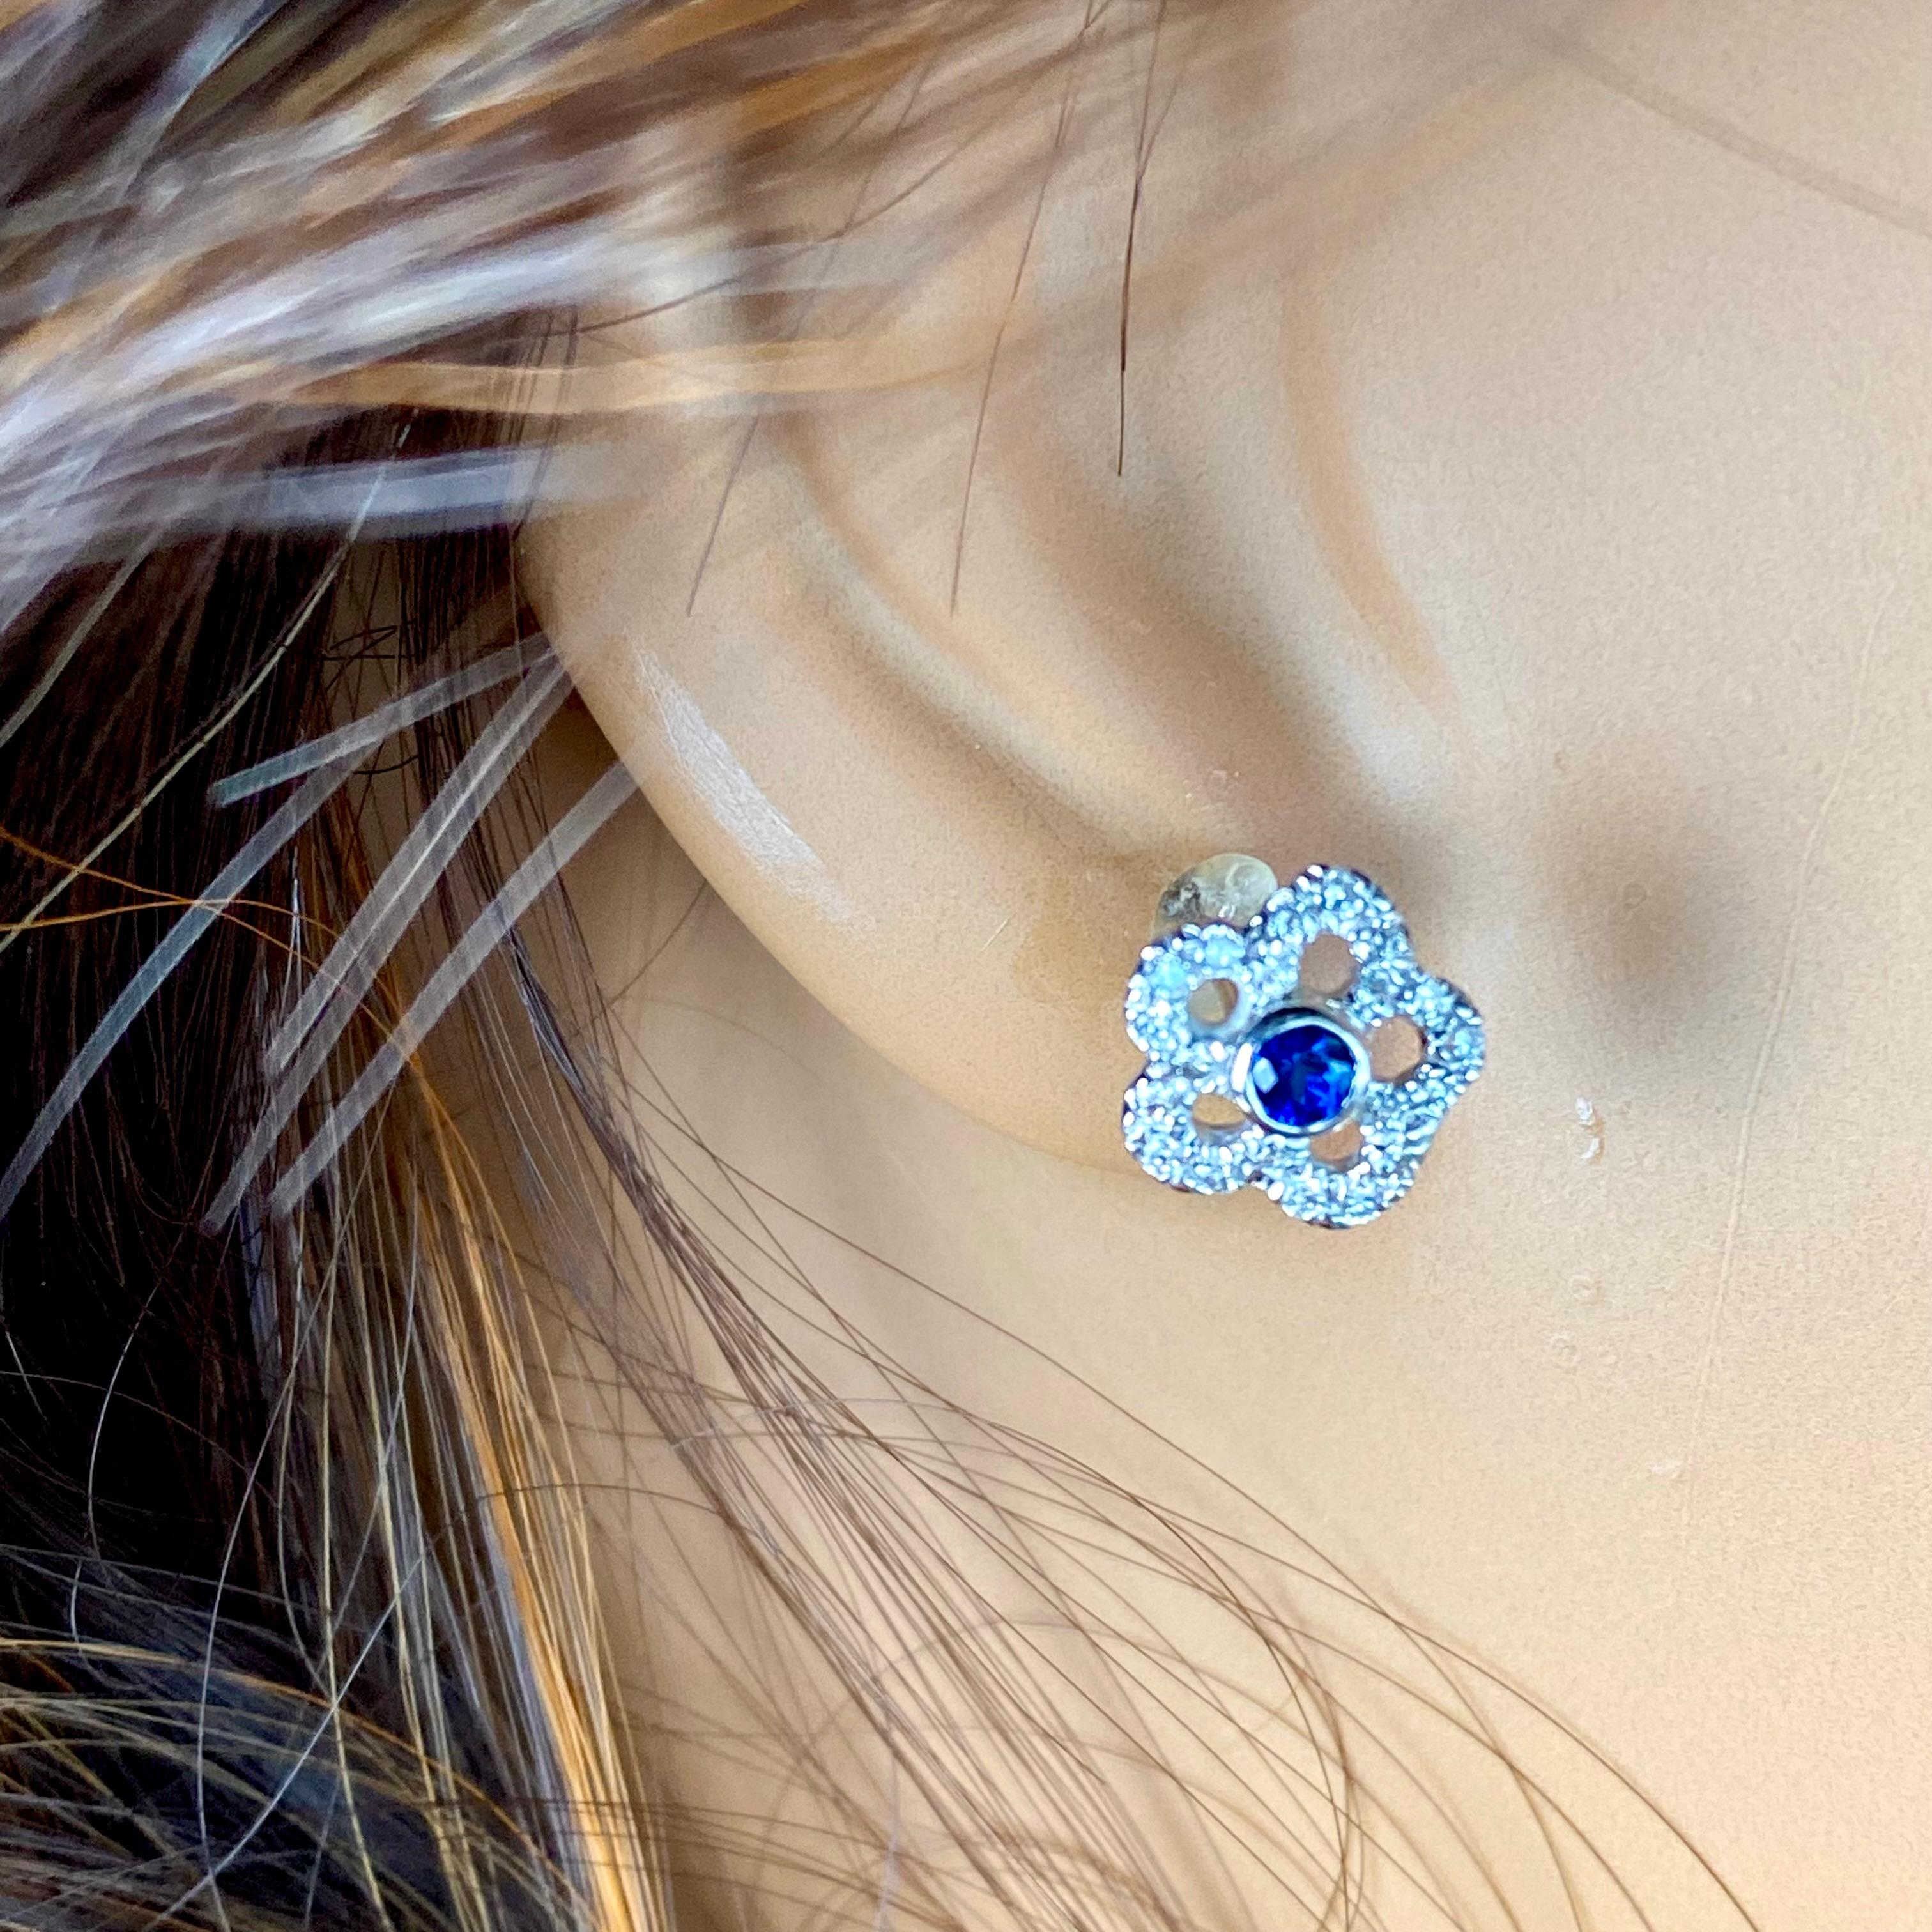 Introducing our exquisite Bright Blue Sapphire Pave Diamond Earrings, a stunning addition to our collection. Crafted with precision and elegance, these earrings feature a cluster of bright blue sapphires set in 14 karat white gold.
Key